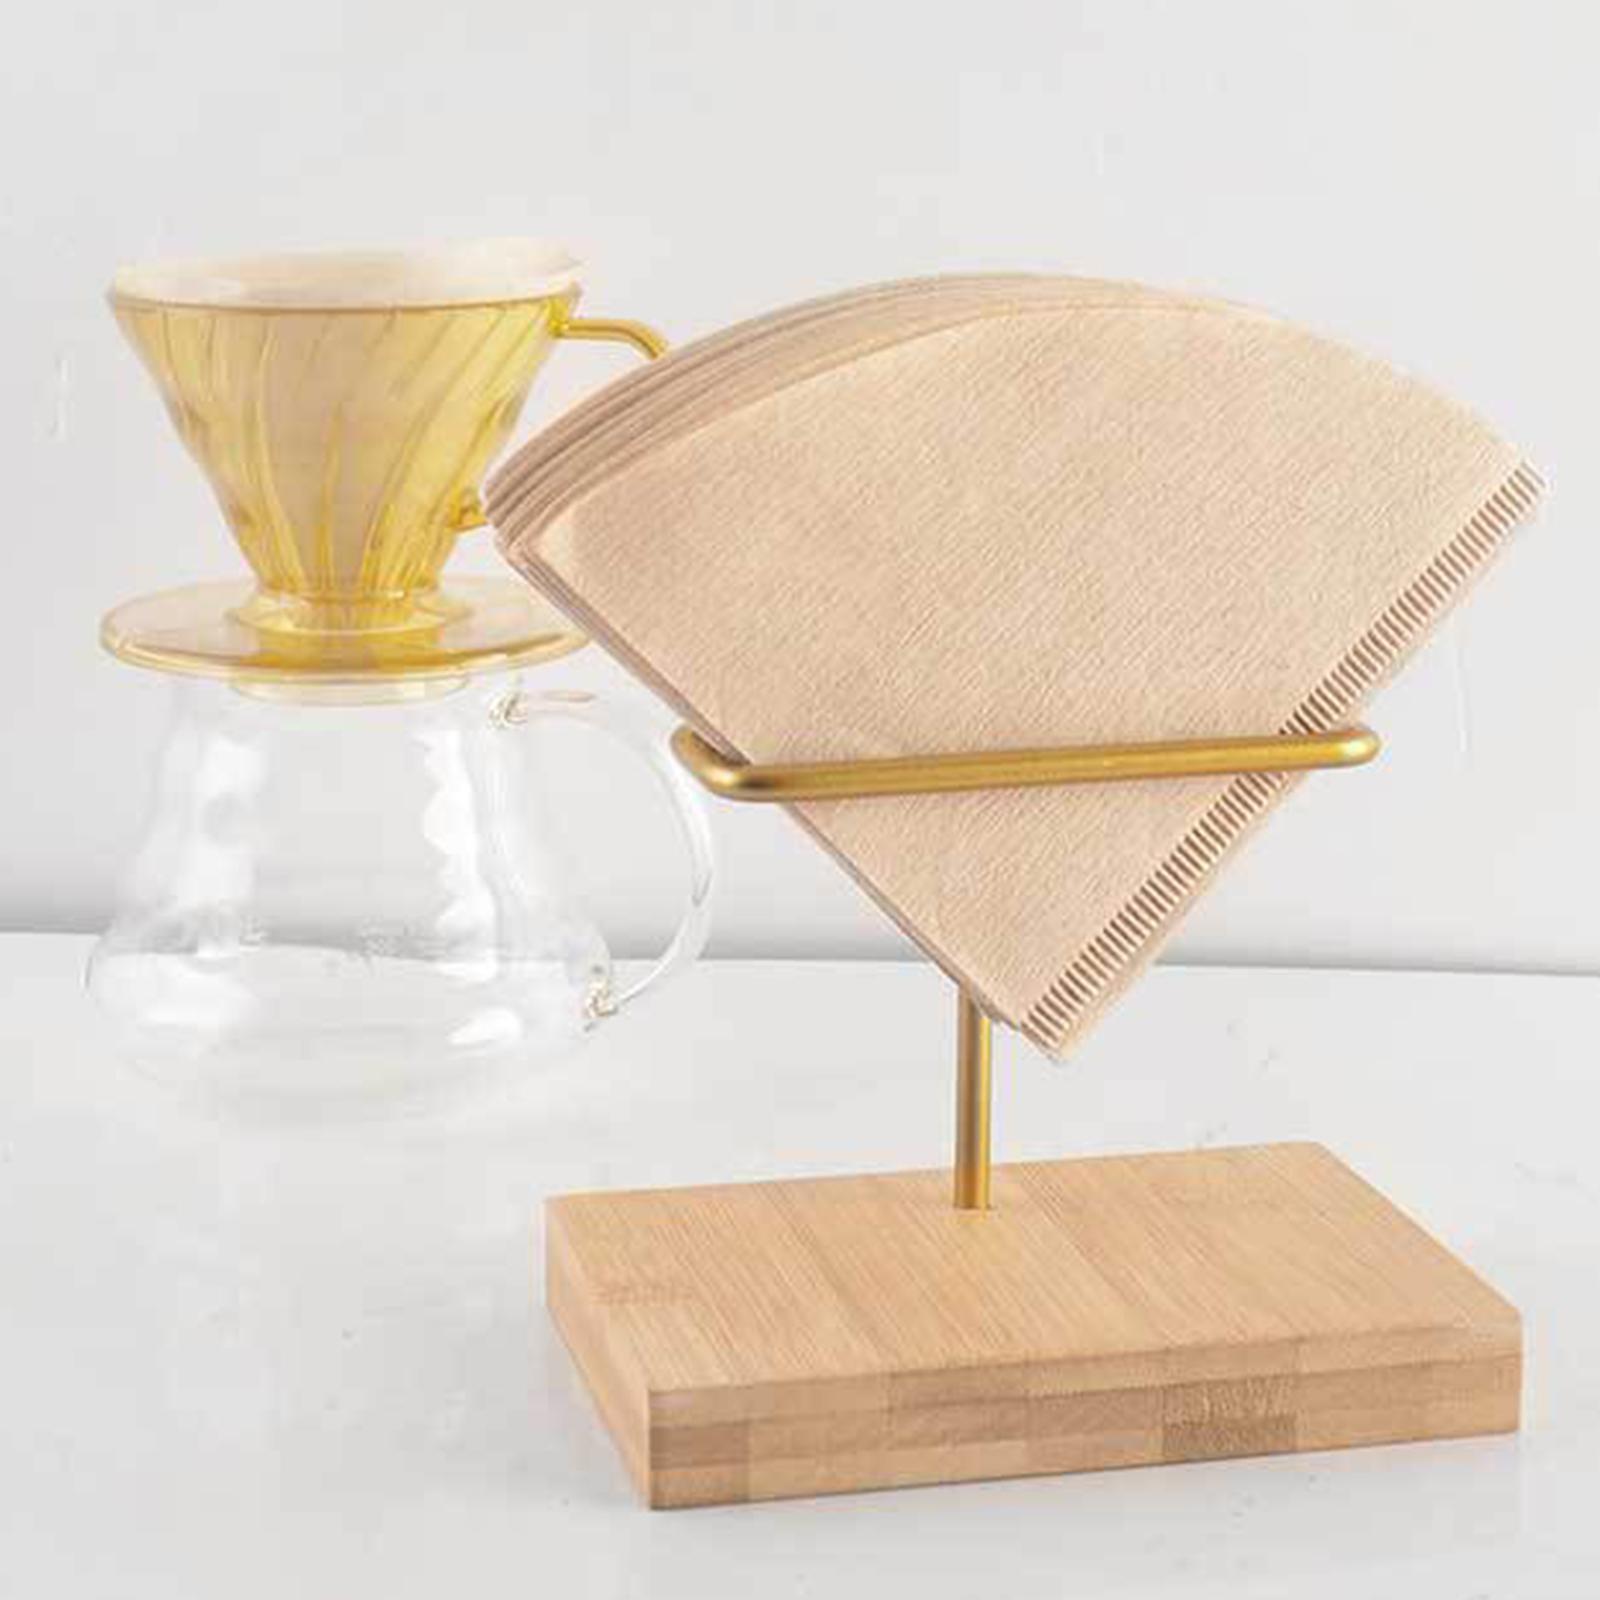 Coffee Filter Holder, Bamboo Metal Coffee Filter Paper Holder for Home Kitchen Cafe Bar Coffee Filters Storage Organizer